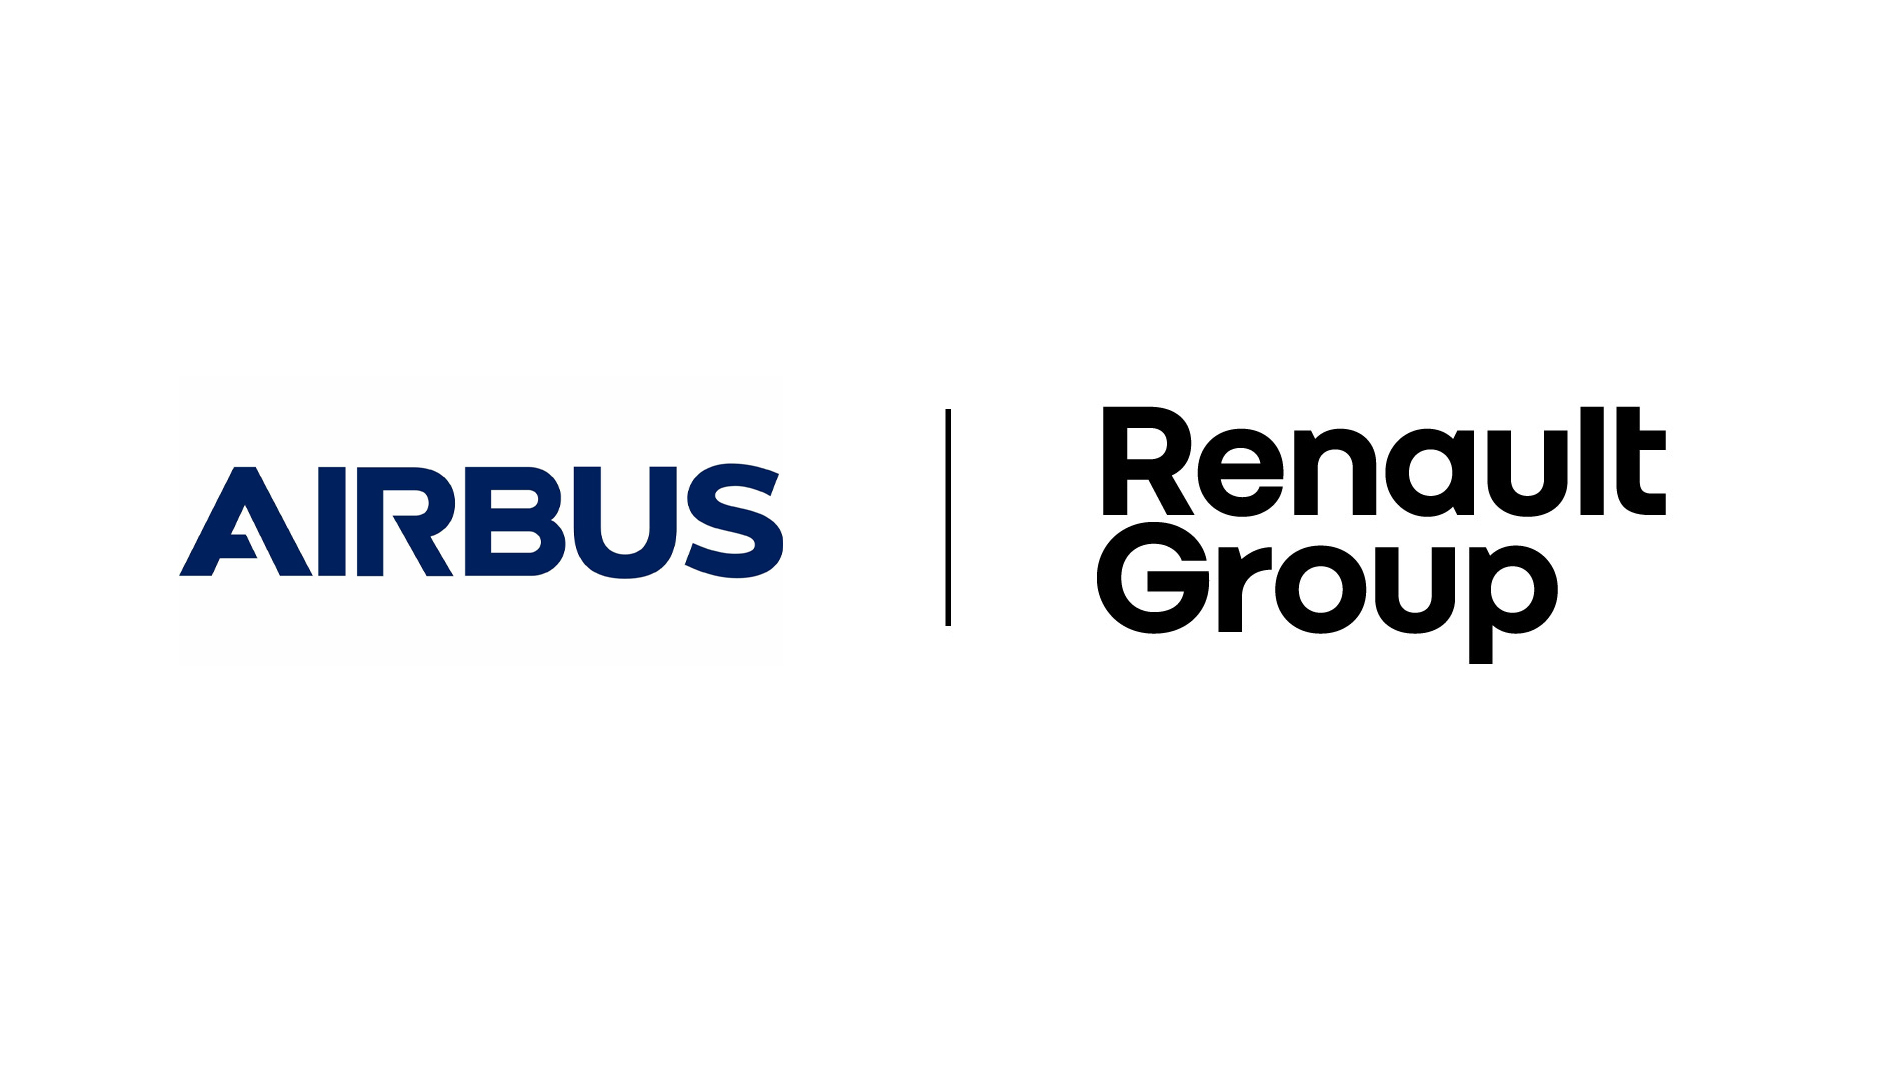 Airbus and Renault Group logos side by side on a white background.